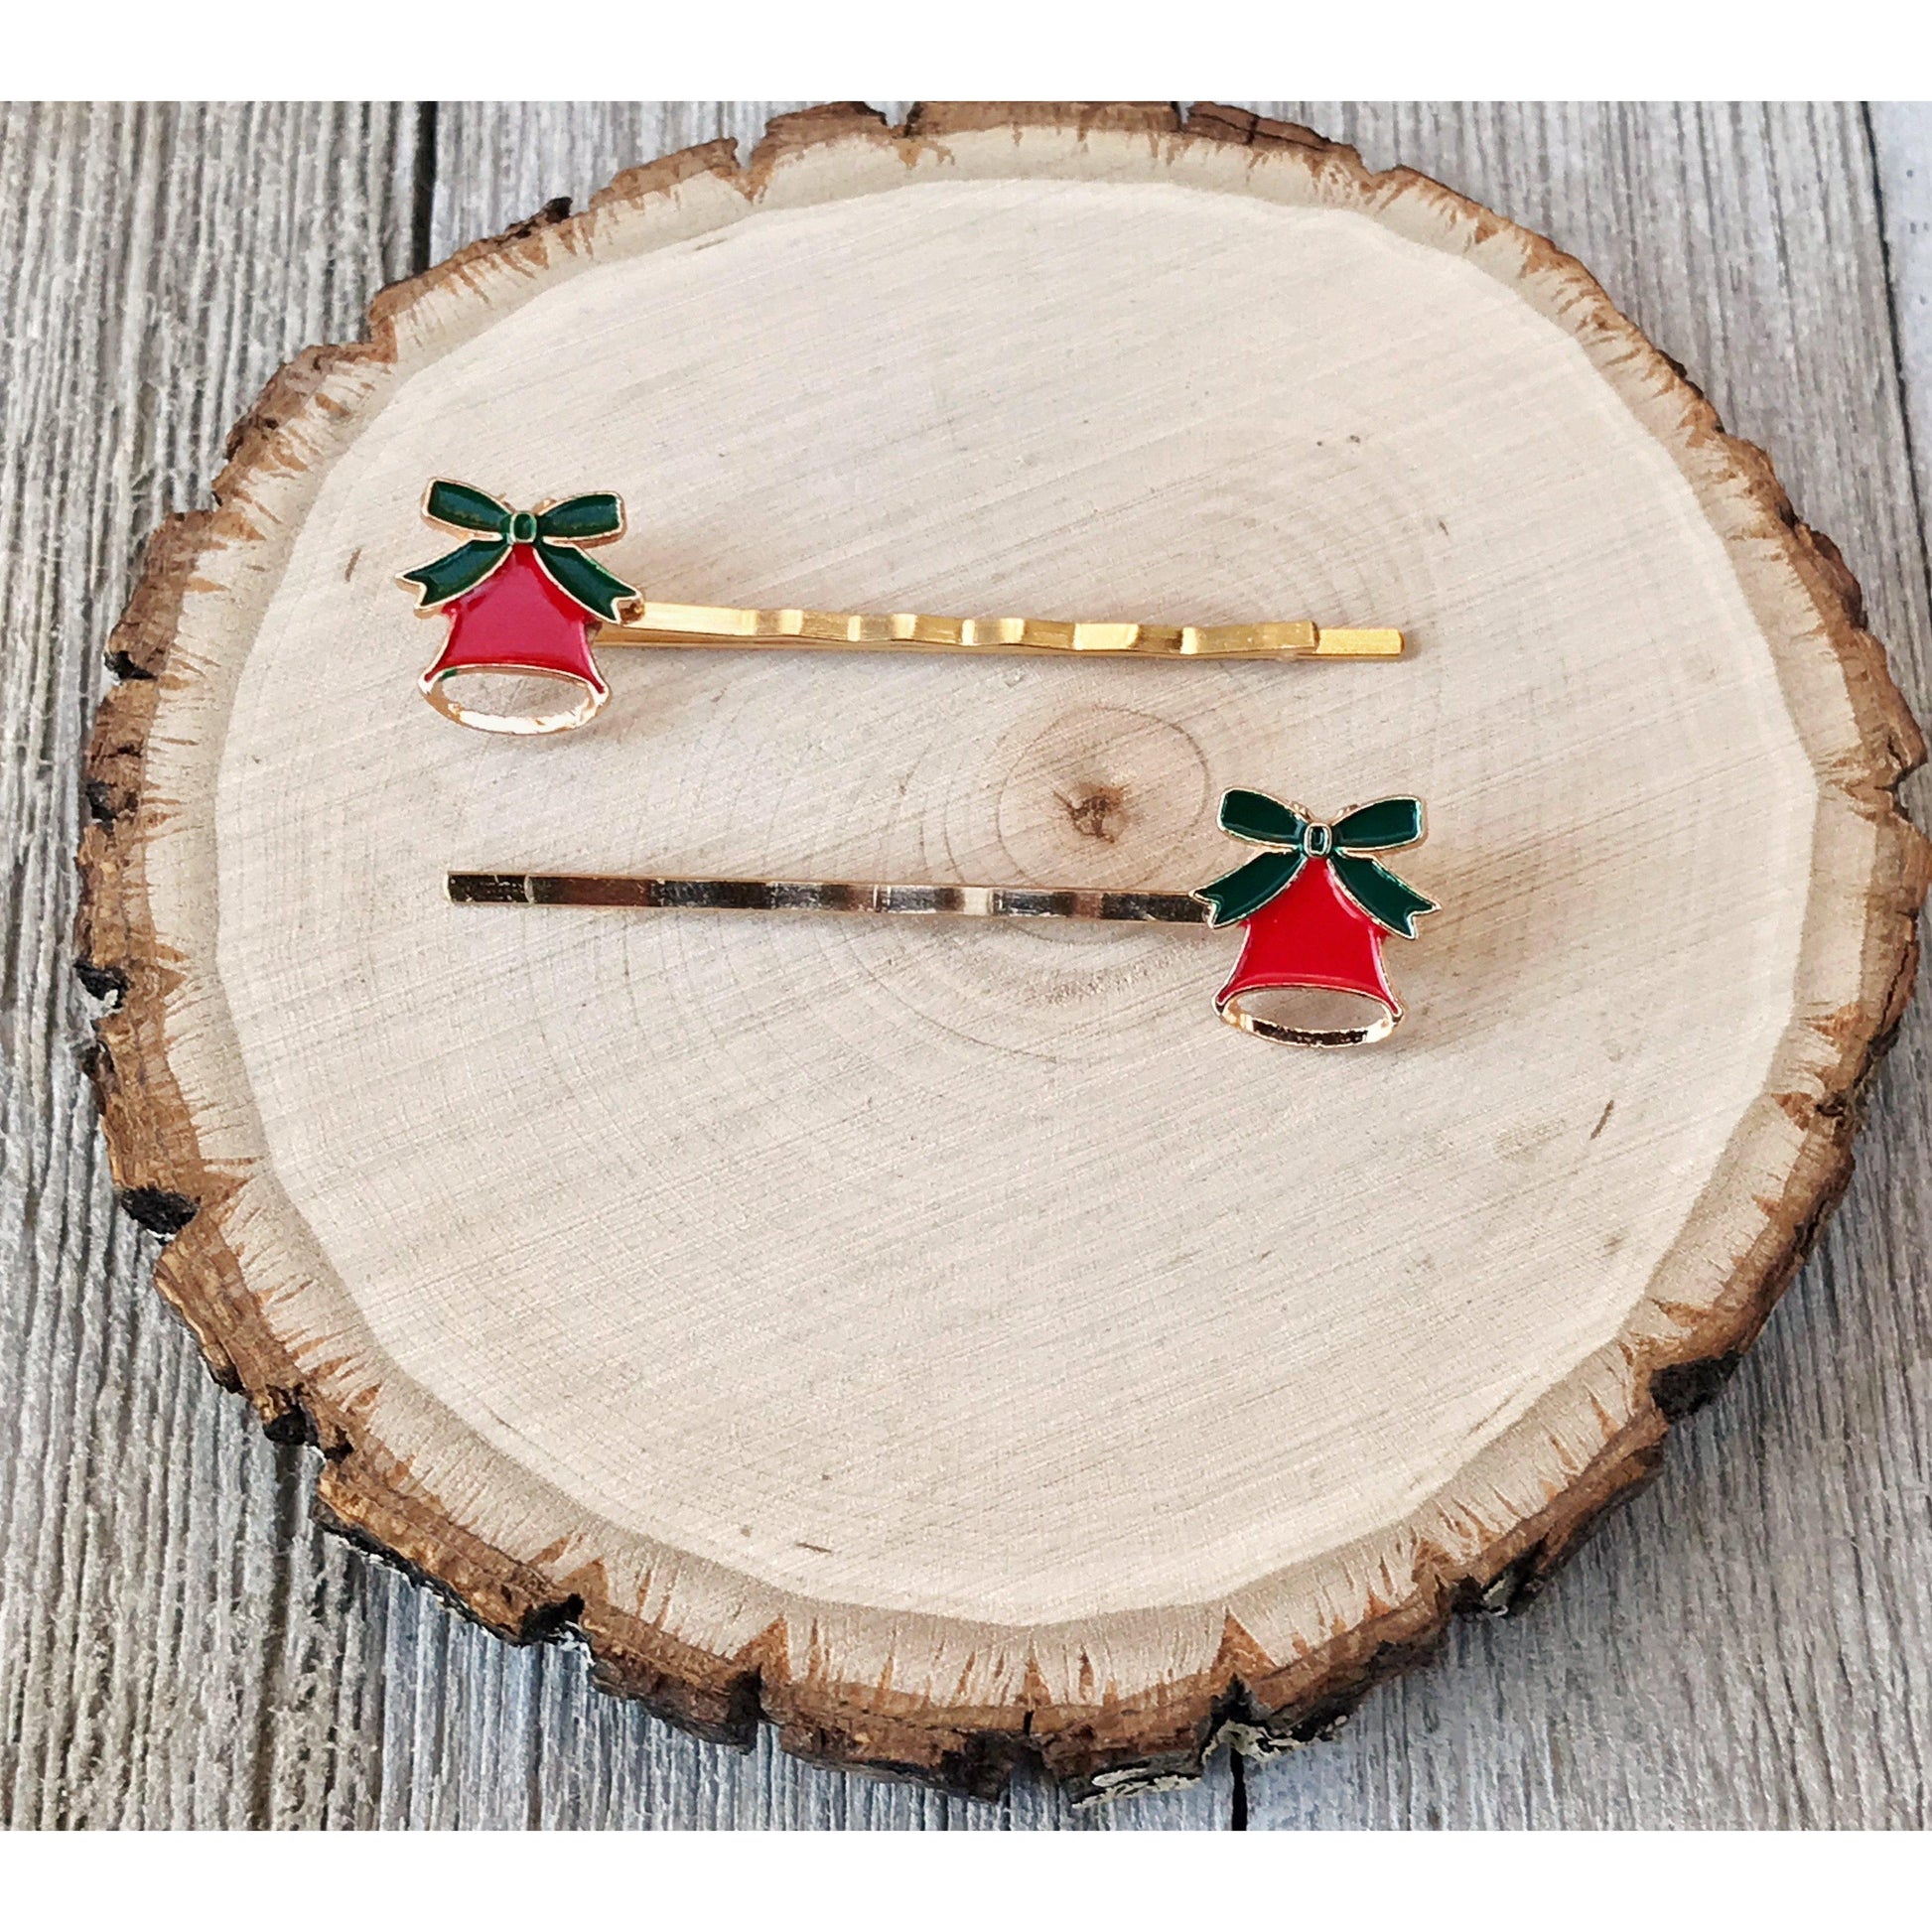 Red Bell Christmas Bobby Pins - Festive Holiday Accessories